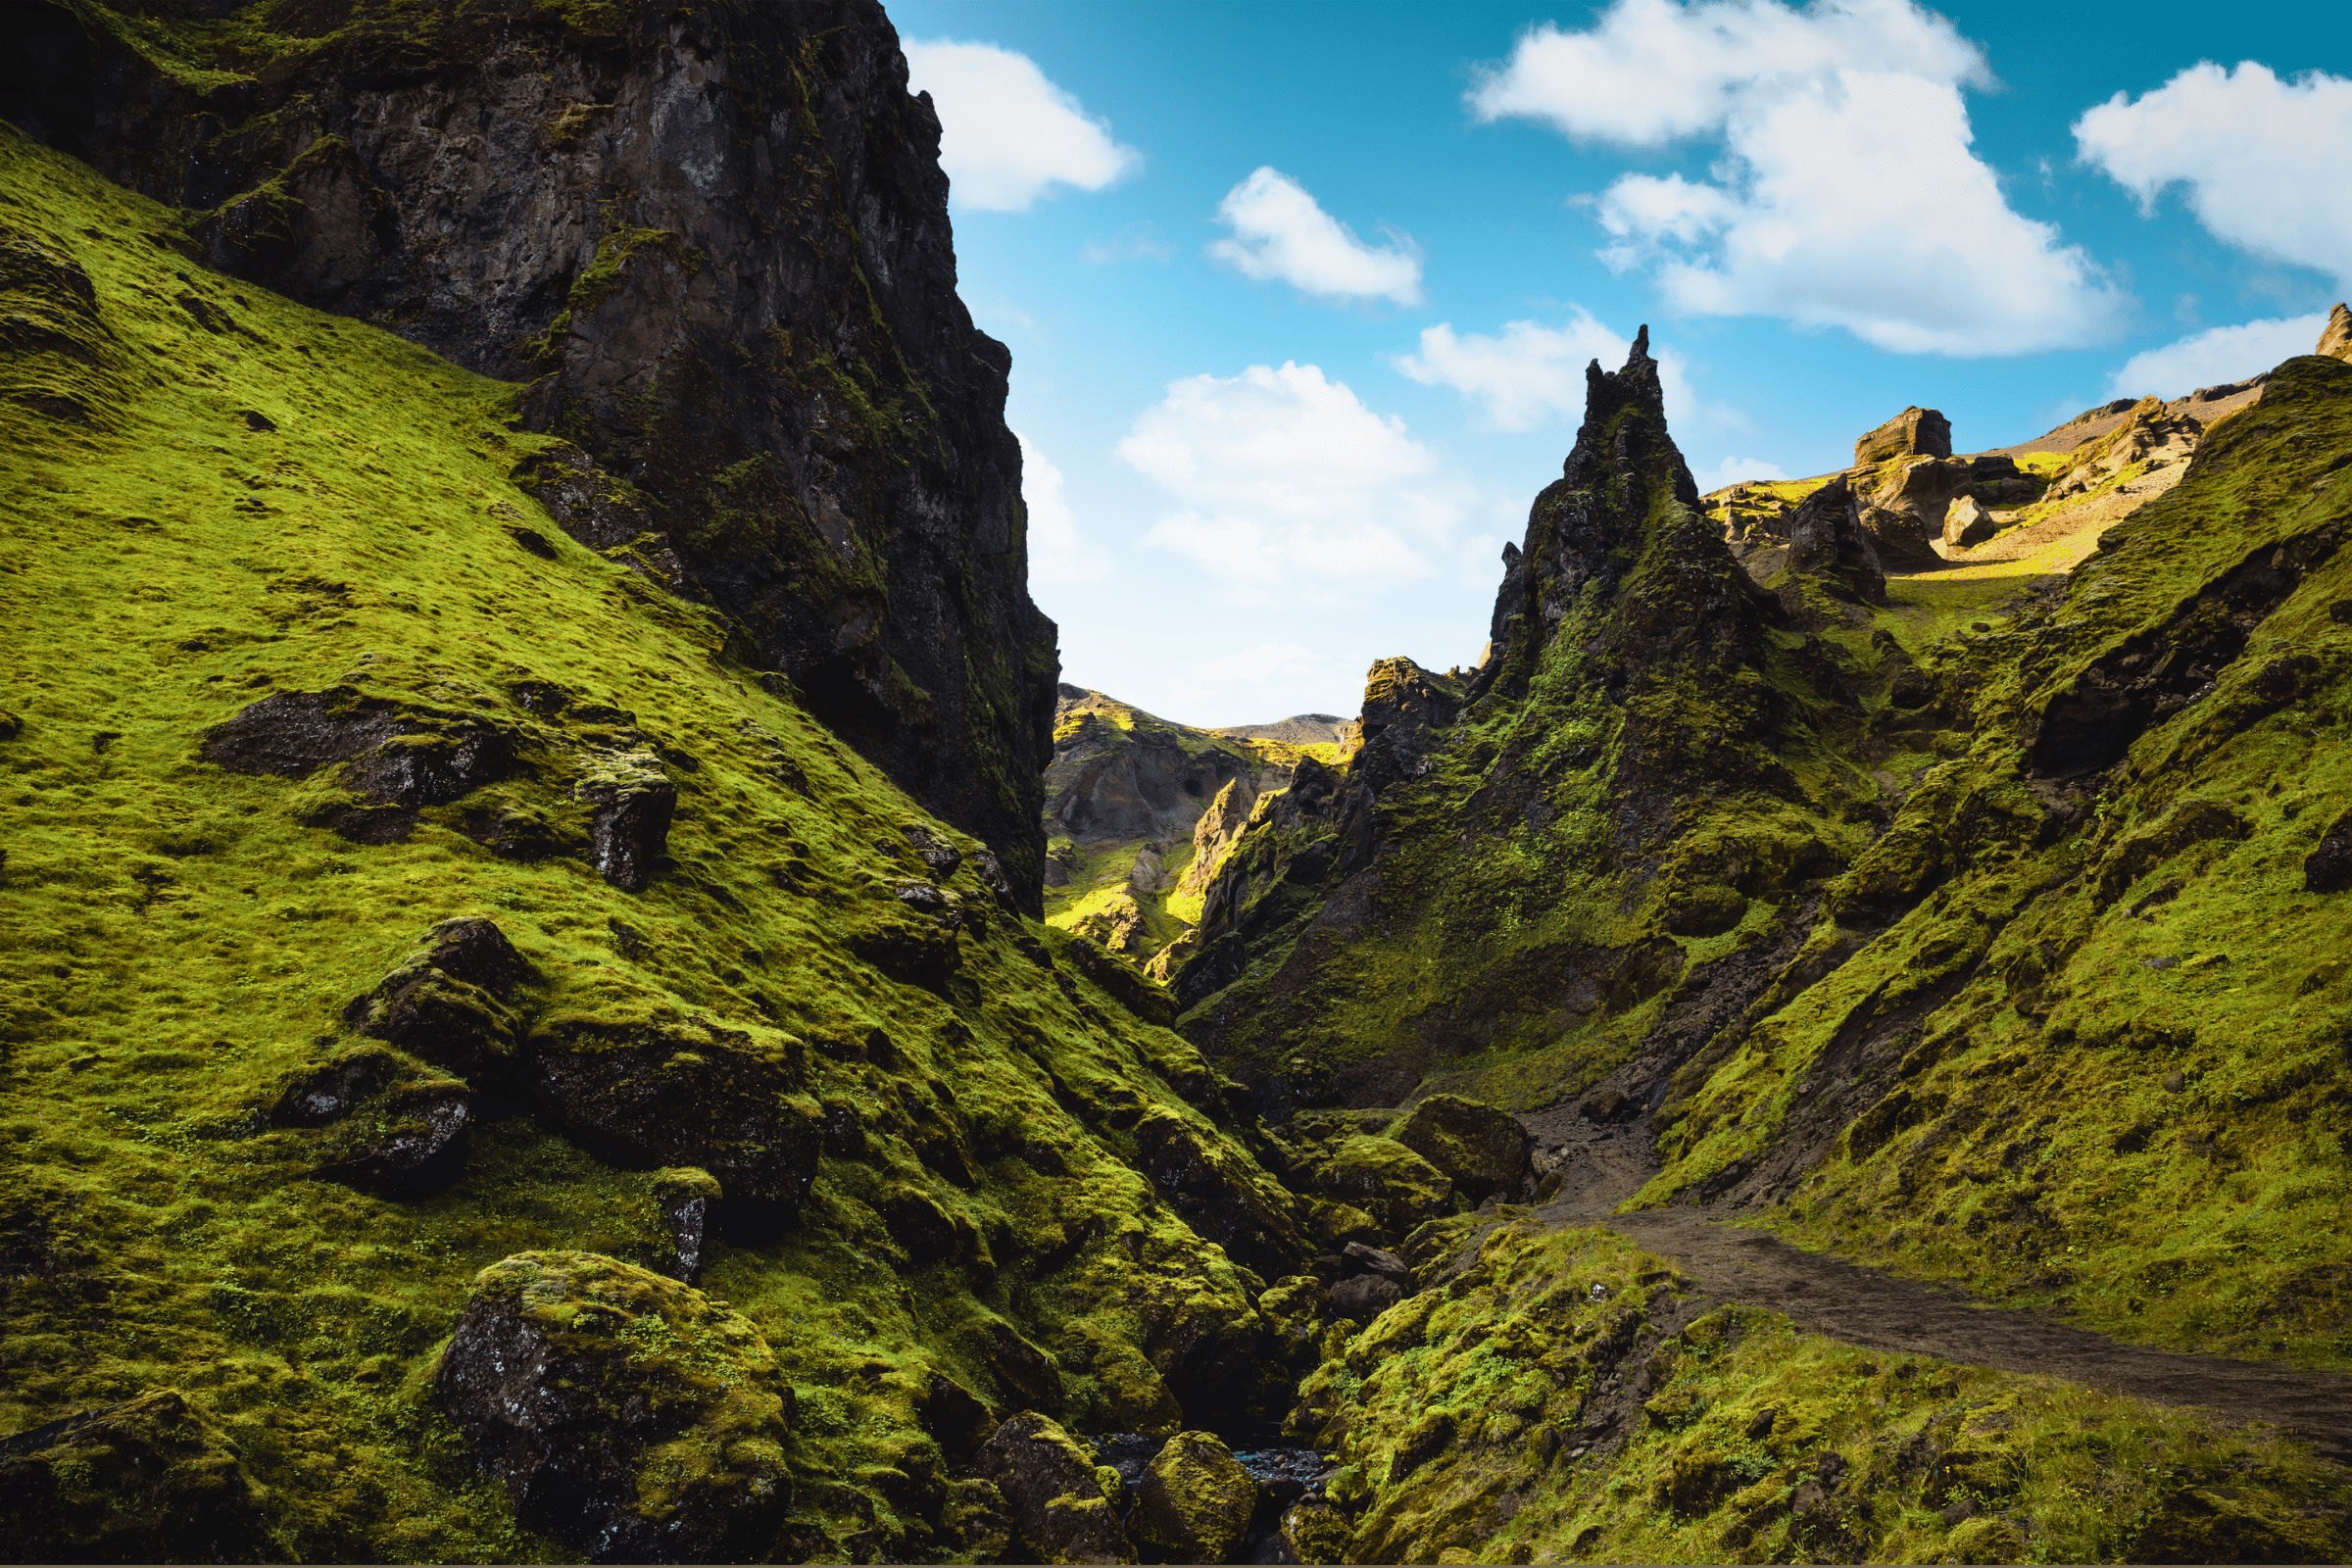 Jagged and moss-covered cliffs of Thakgil Canyon in South Iceland.